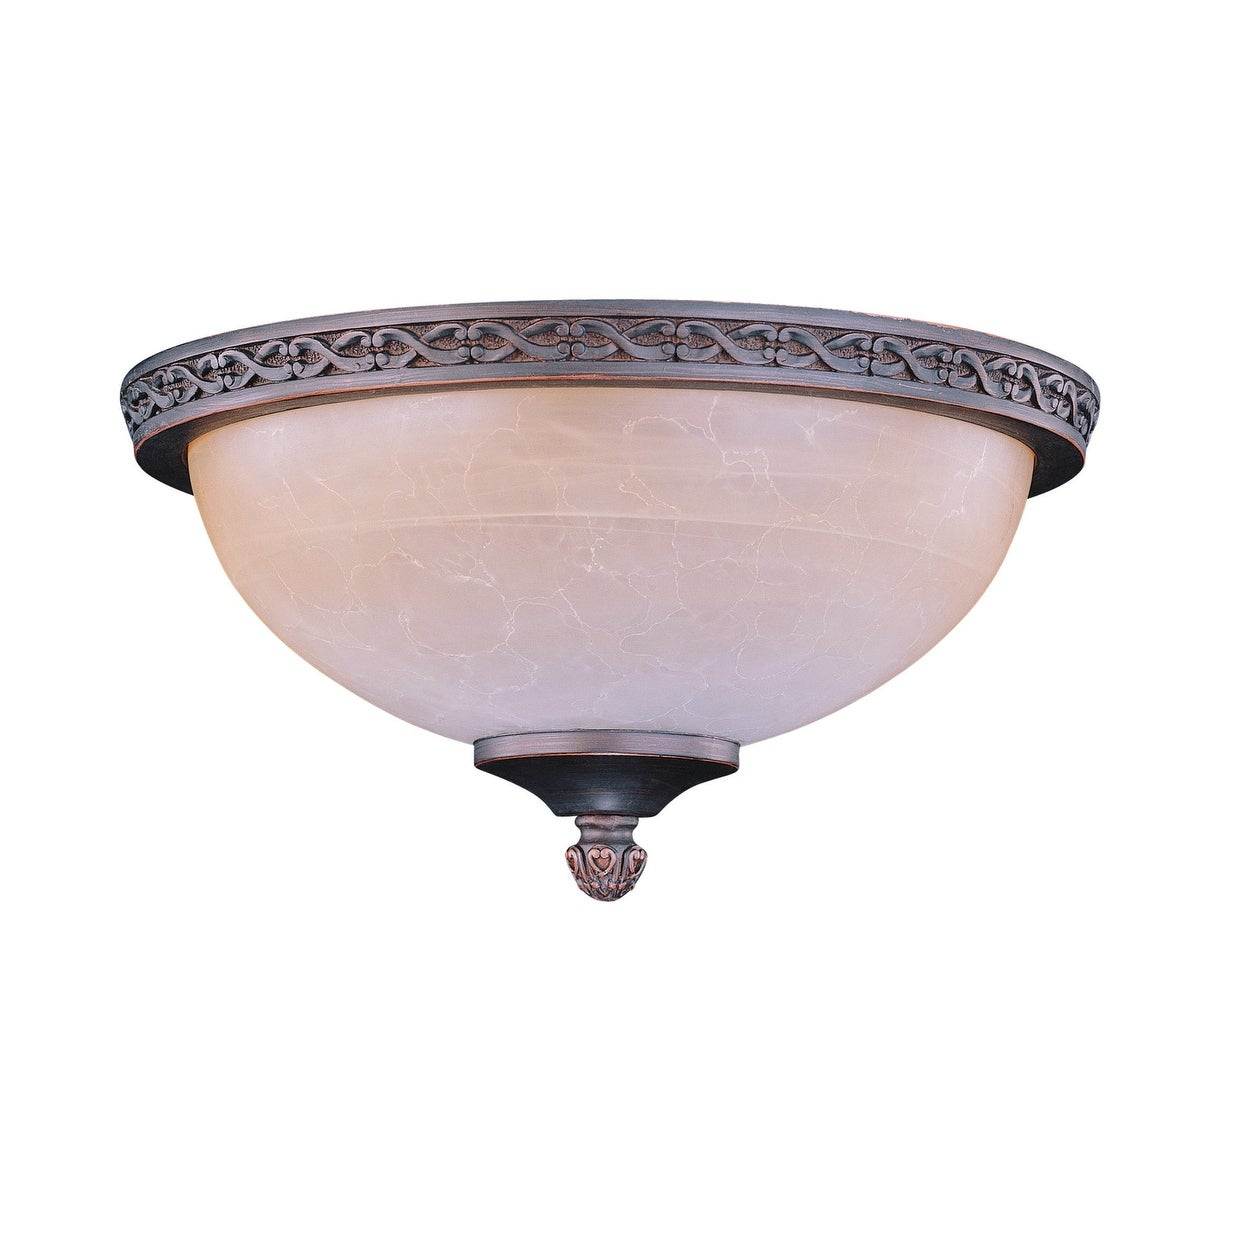 Concord Y 281a S 2 Light 6 14 Wide Fluorescent Ceiling Fan Light Kit Oil Rubbed Bronze in dimensions 1240 X 1240